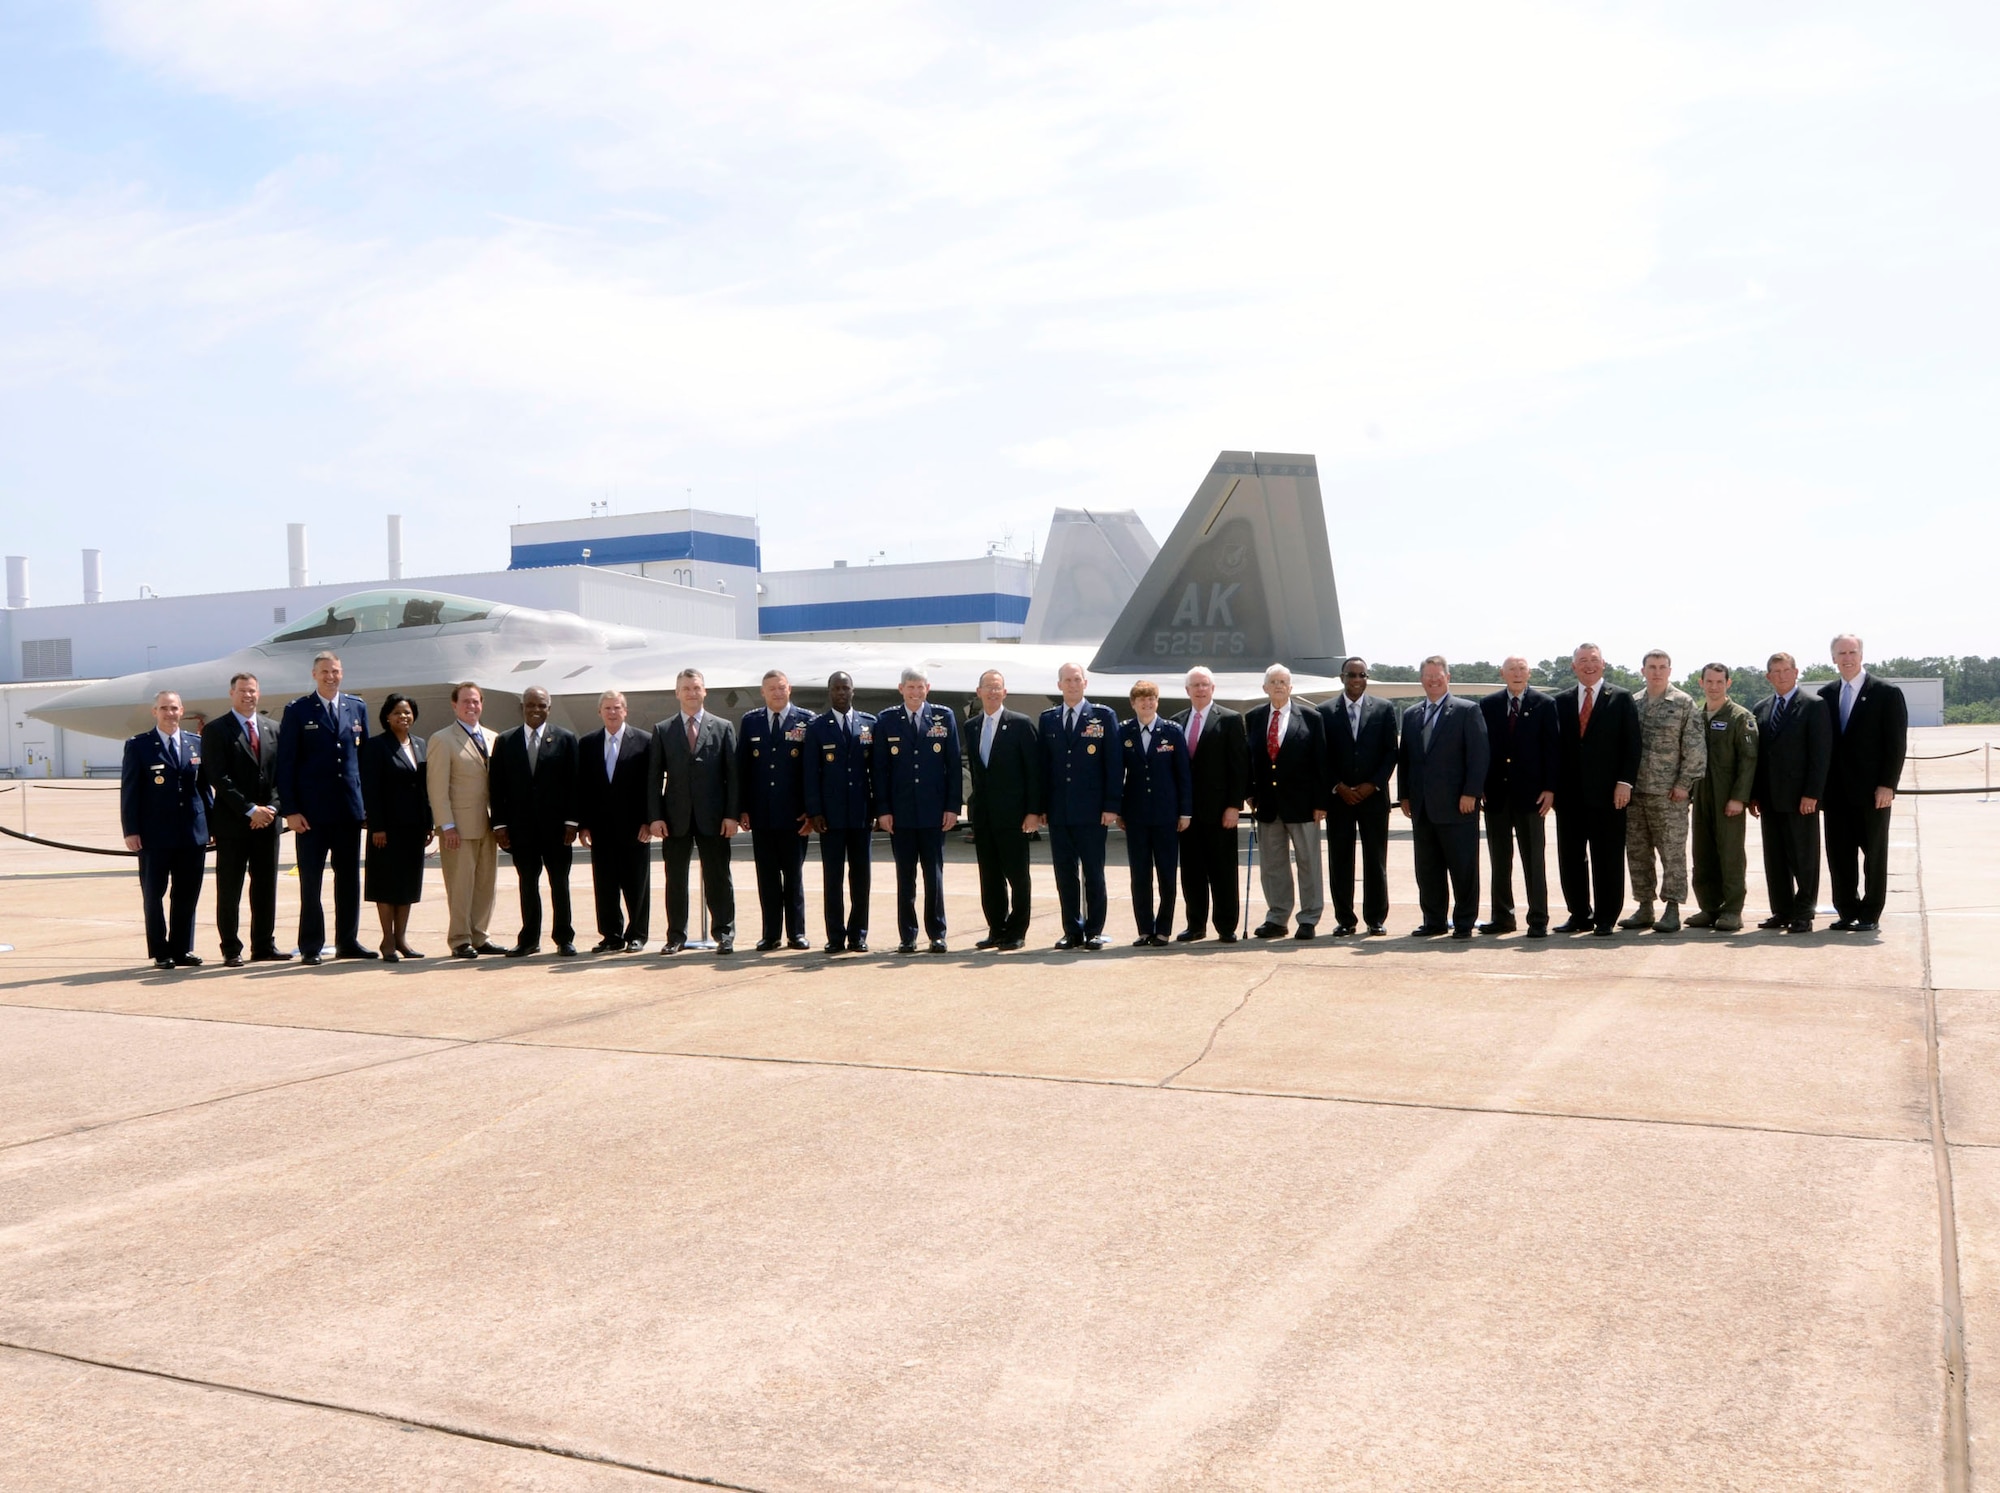 Air Force senior leaders and Lockheed Martin Aeronautical Company executives attend the formal ceremony unveiling the last F-22 Raptor at the Marietta, Ga. plant May 2. (U.S. Air Force photo/Don Peek)